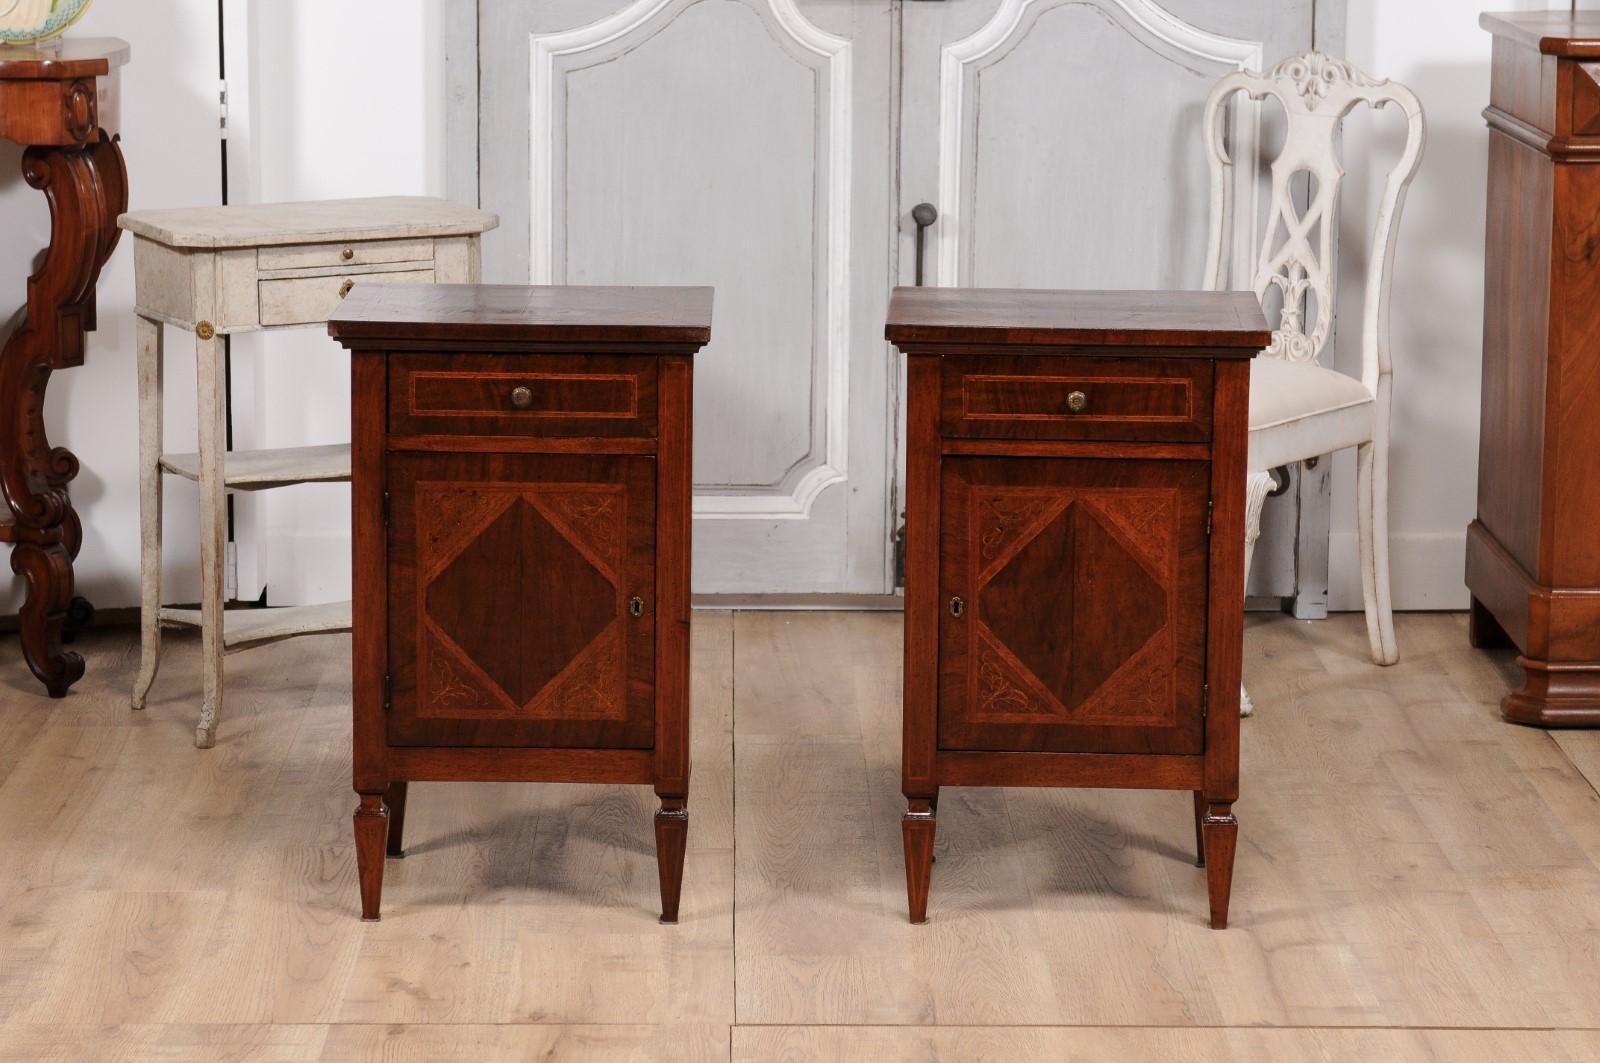 Inlay Italian 1900s Walnut and Mahogany Bedside Tables with Scrolling Marquetry